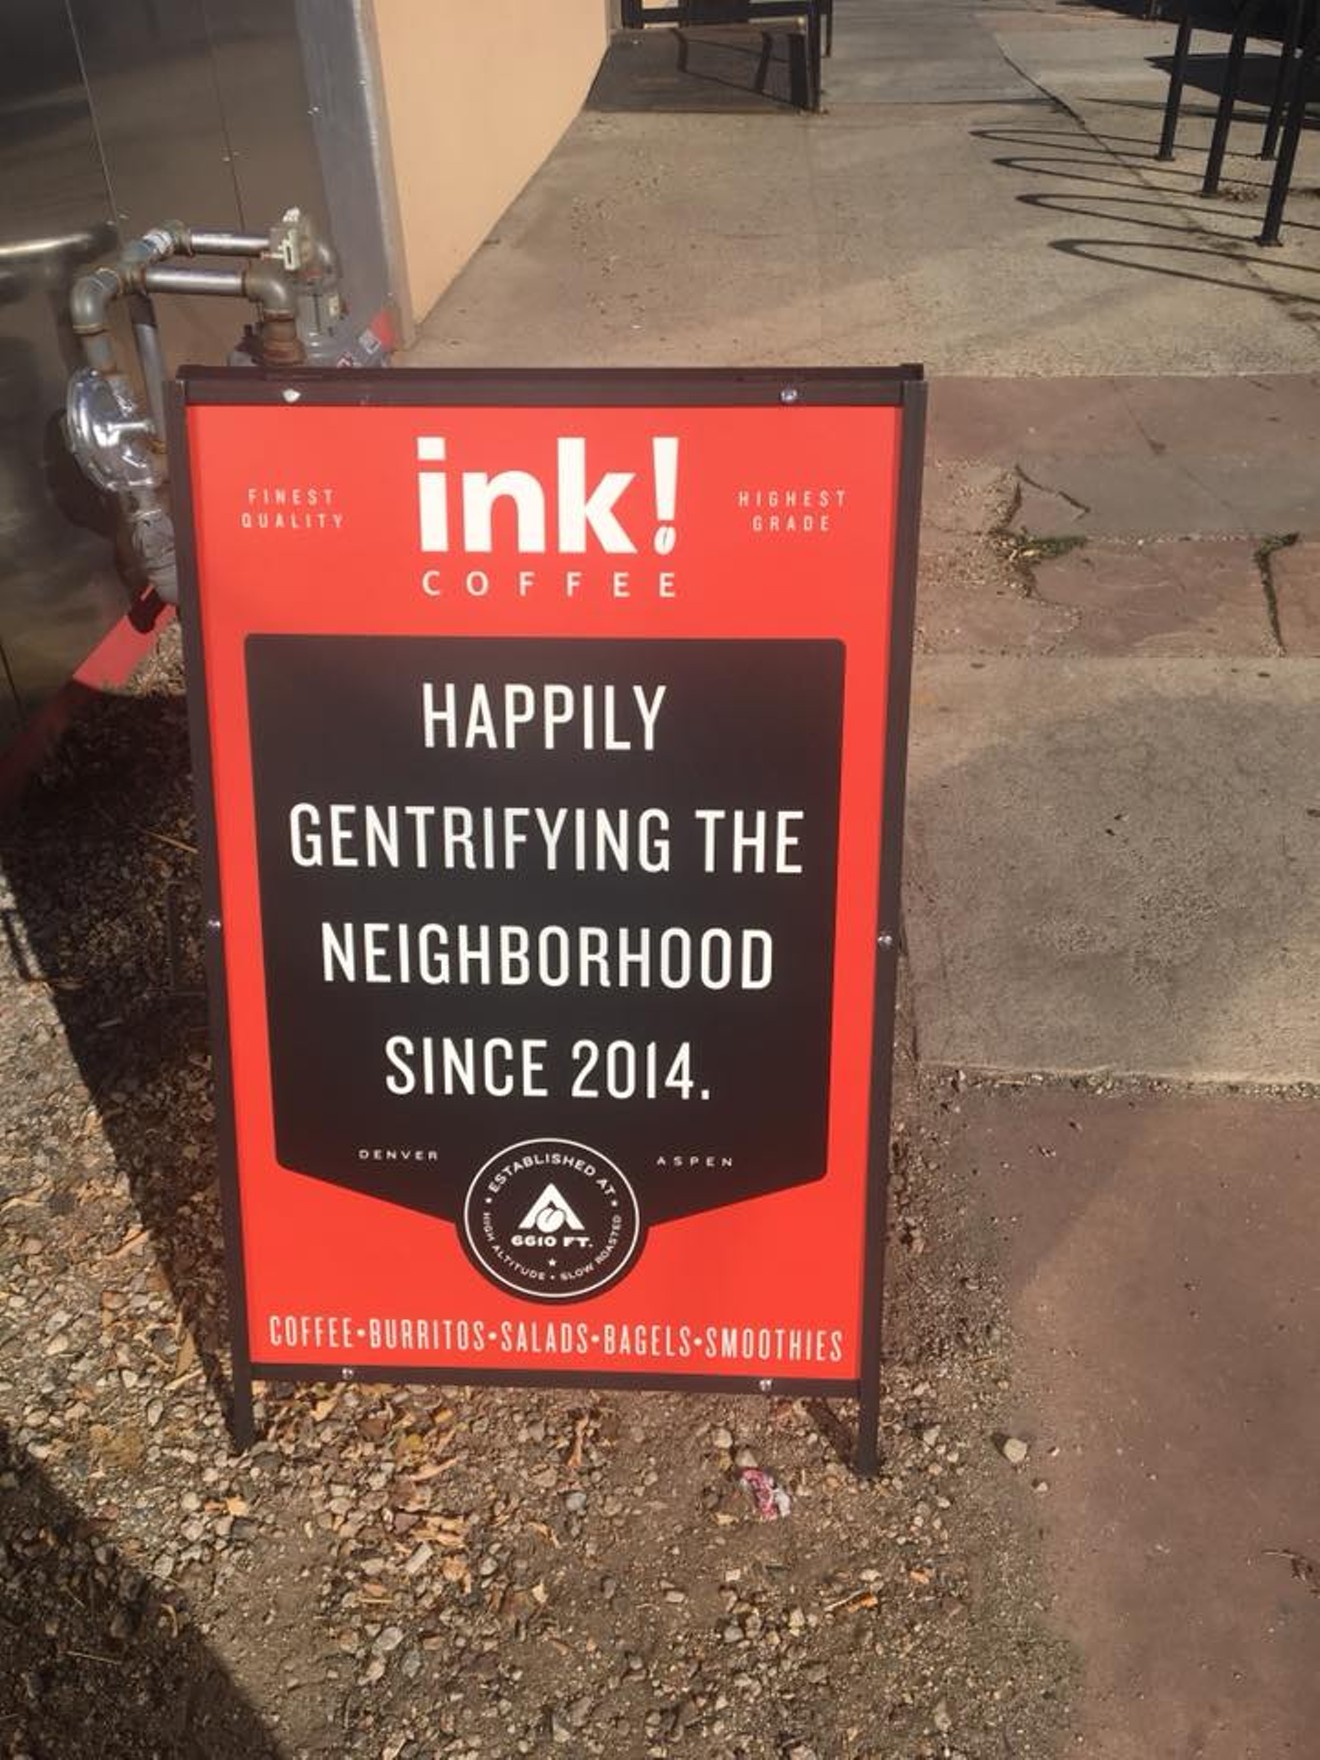 RiNo residents aren't so happy about this sign at Ink! Coffee.